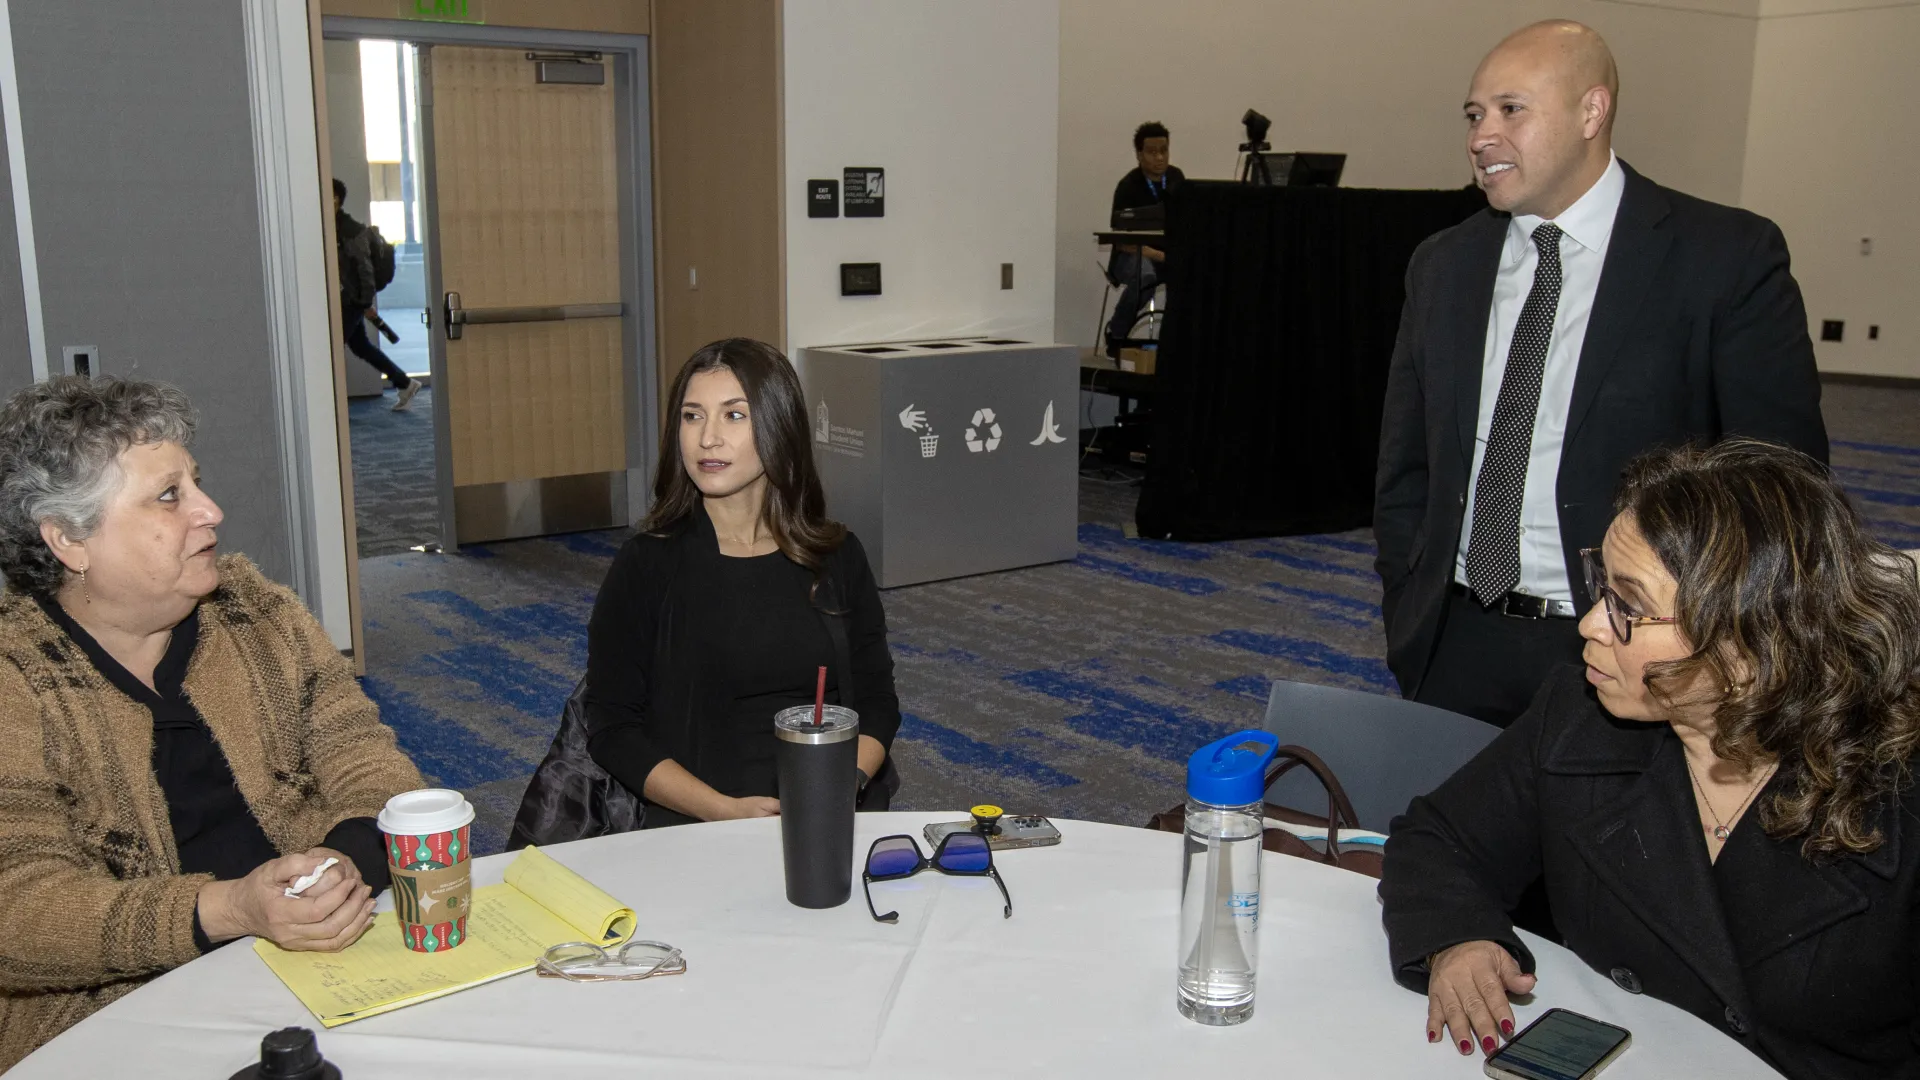 Students and legal professionals meet at the inaugural Careers in Law Day held recently at CSUSB.